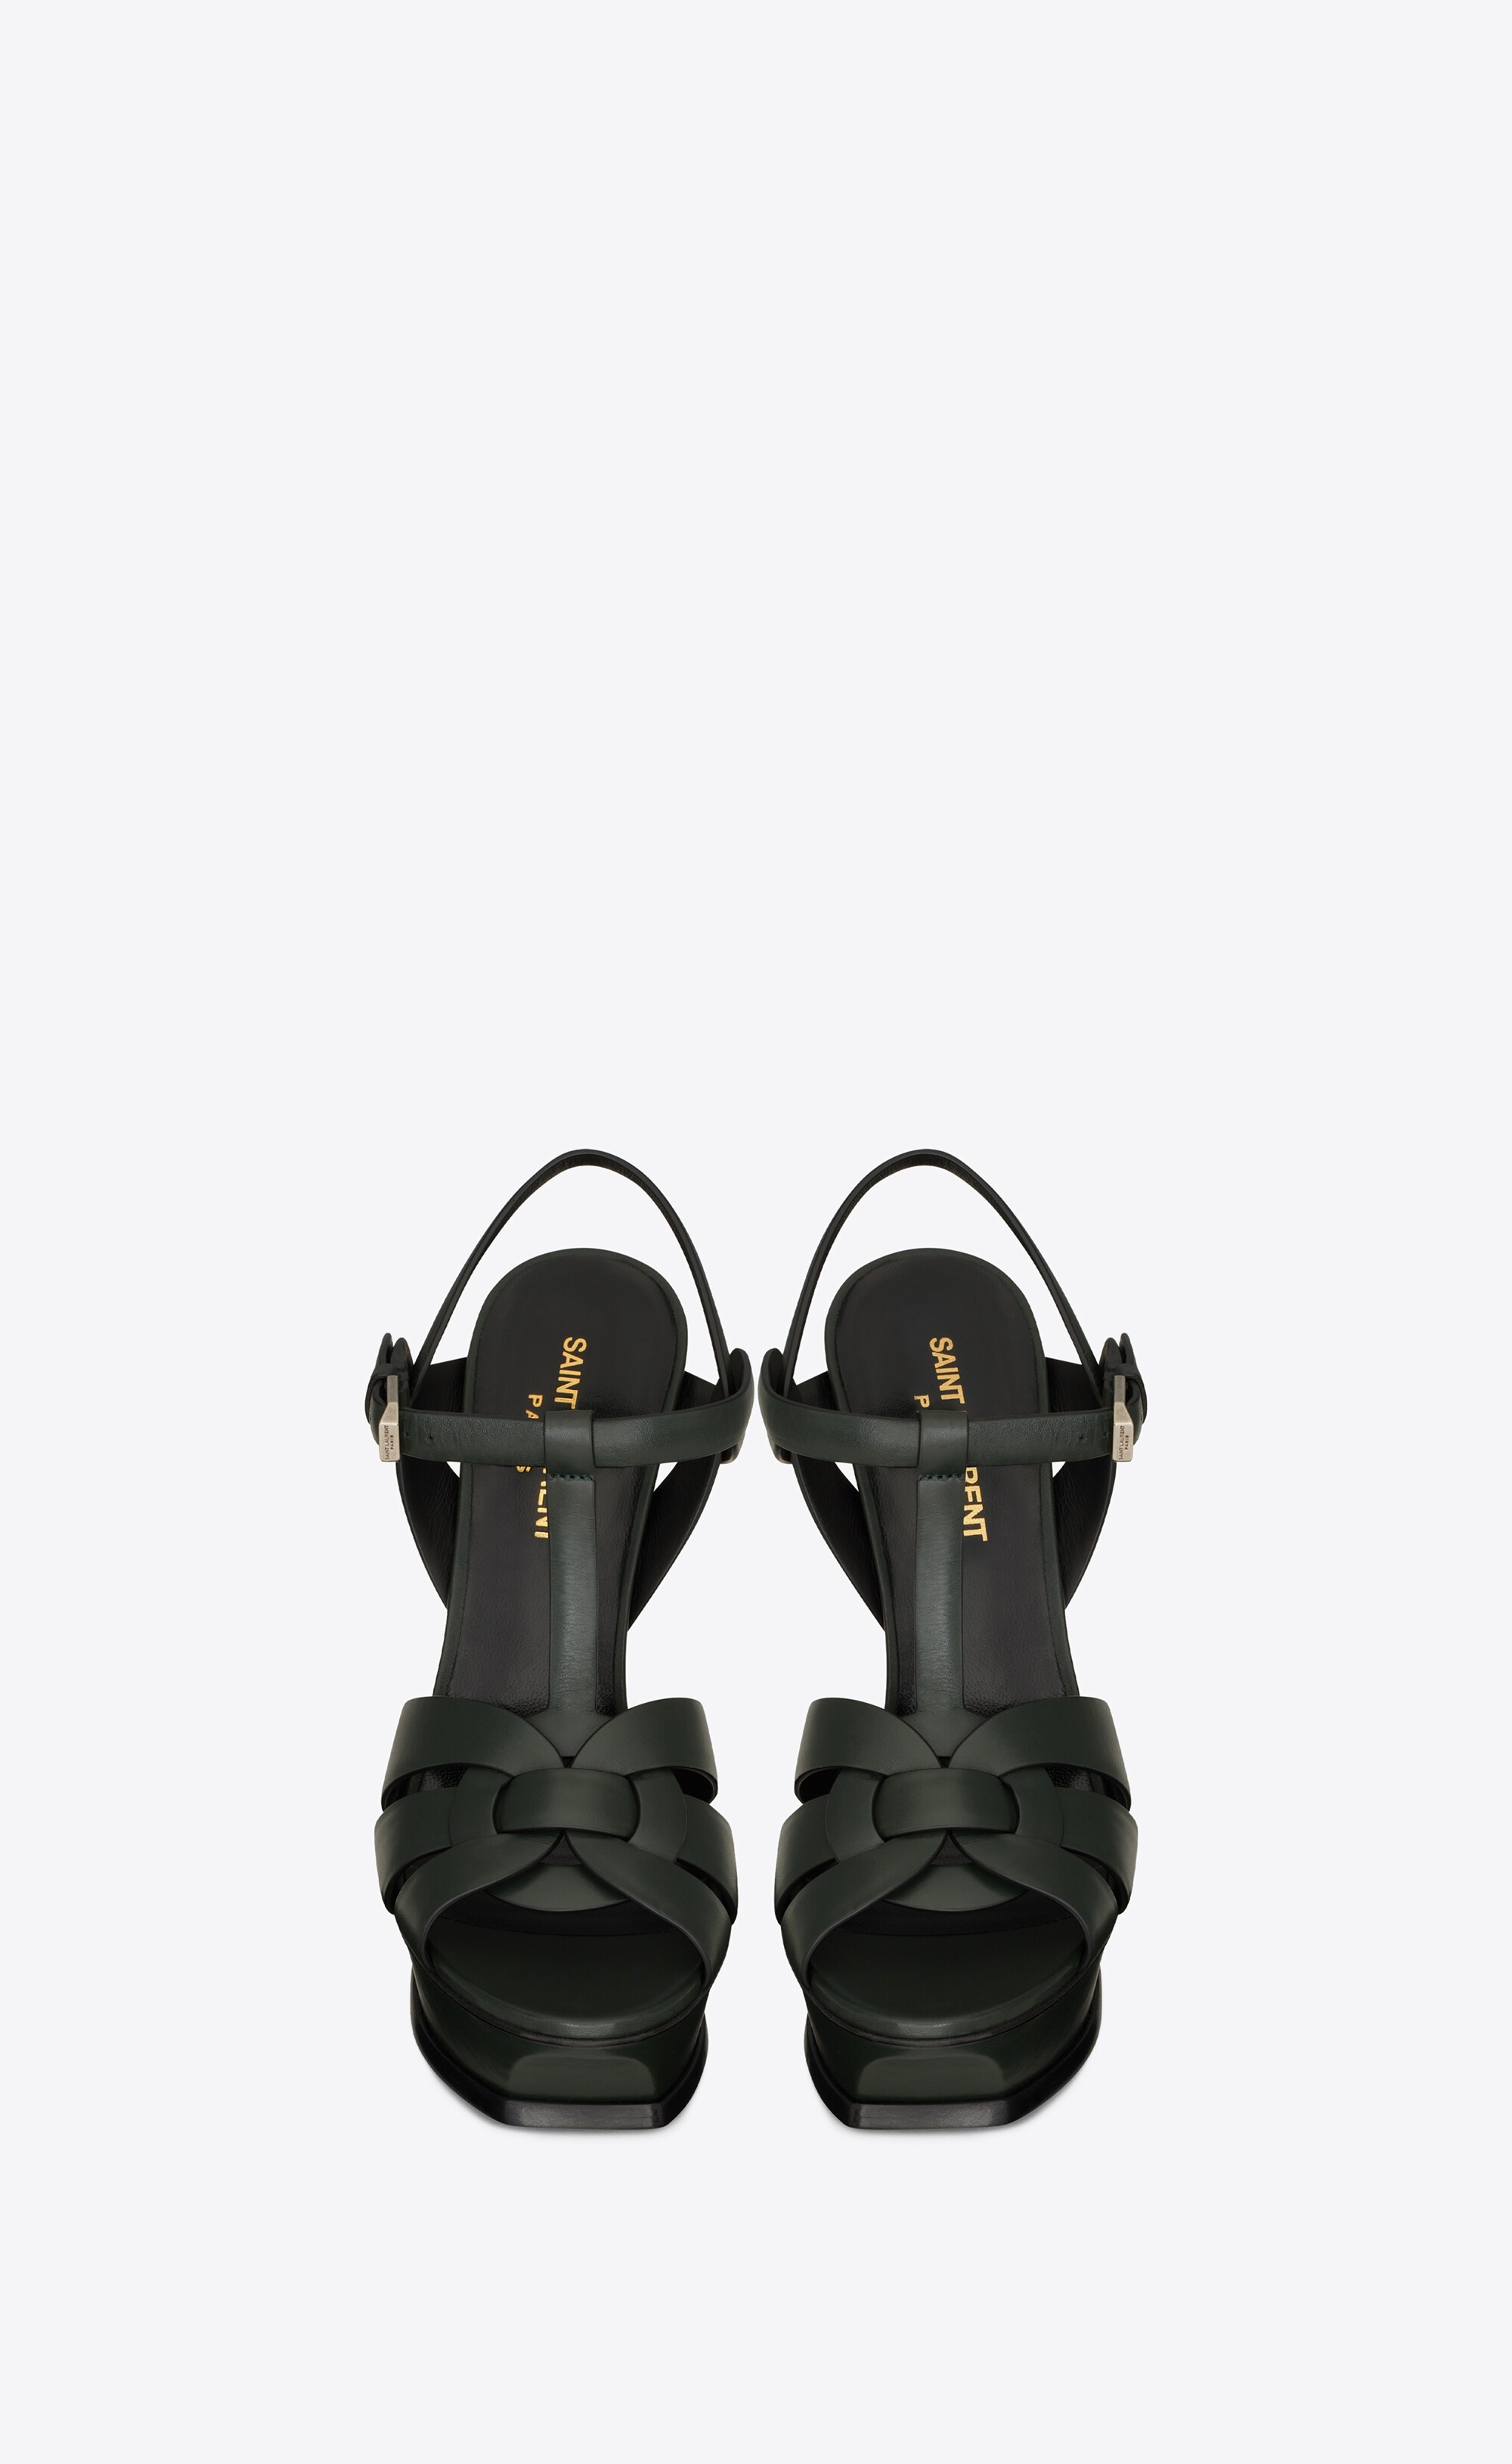 tribute platform sandals in smooth leather - 2